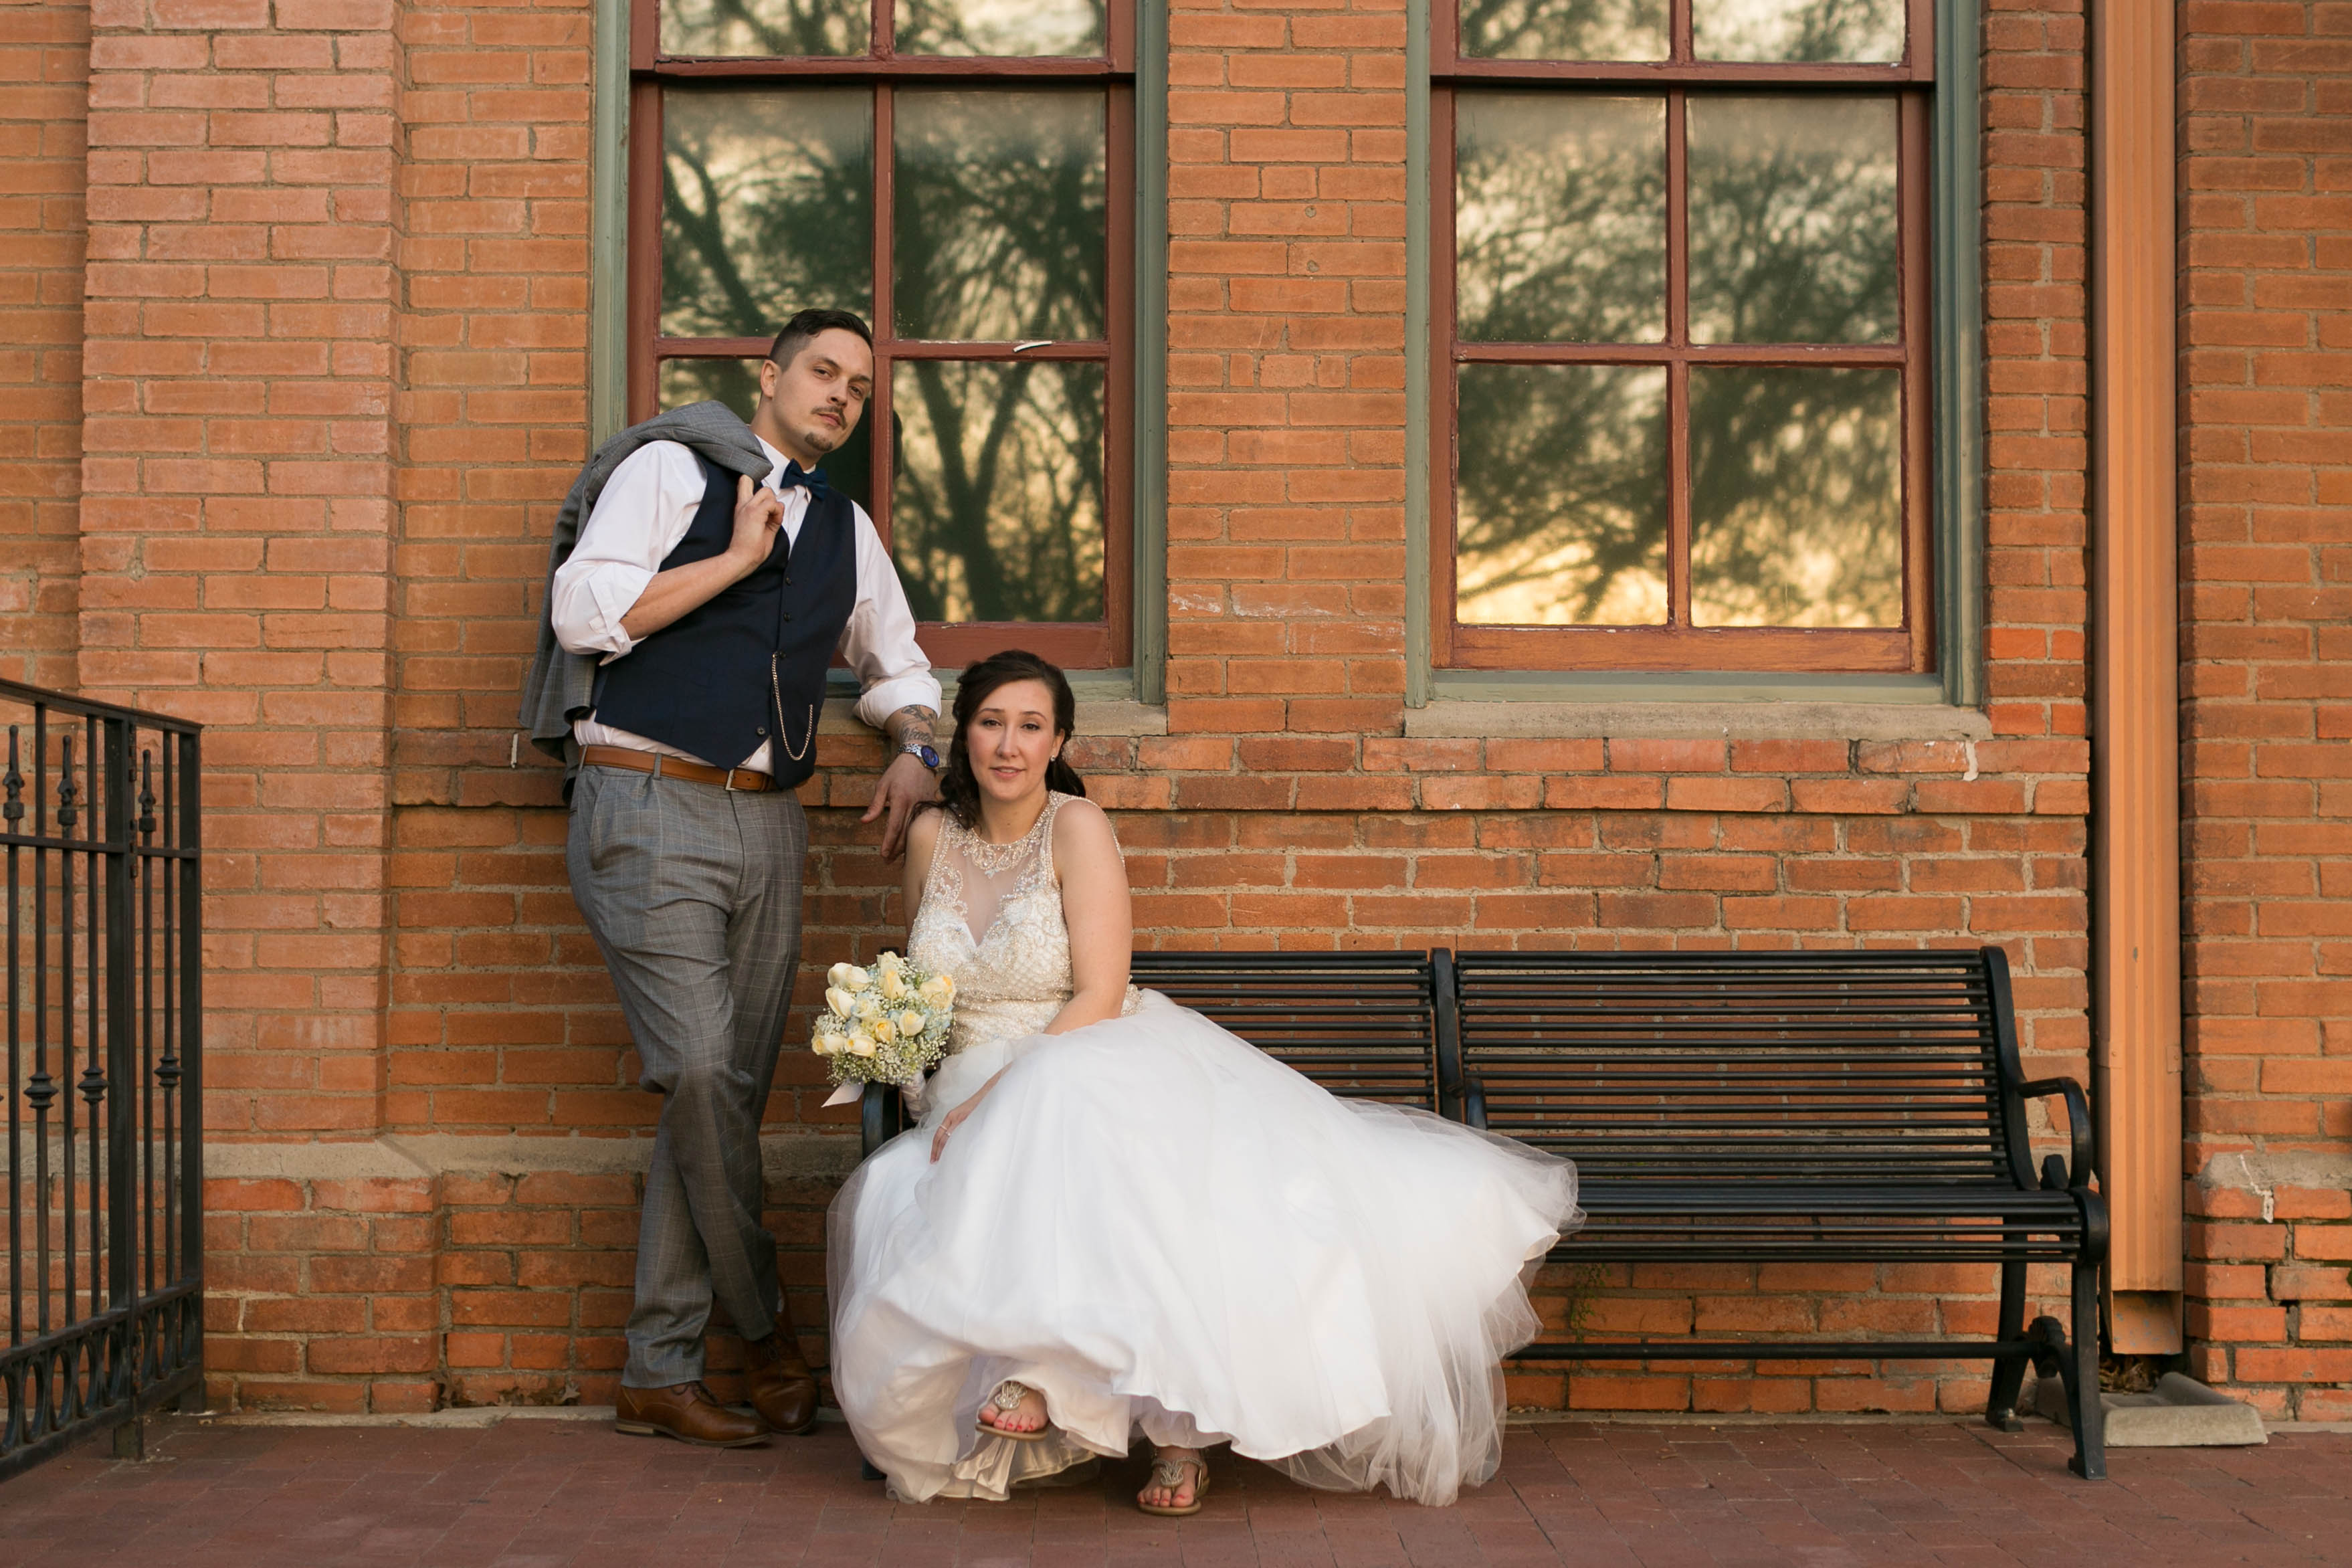 5 Easy Poses for Wedding Couples